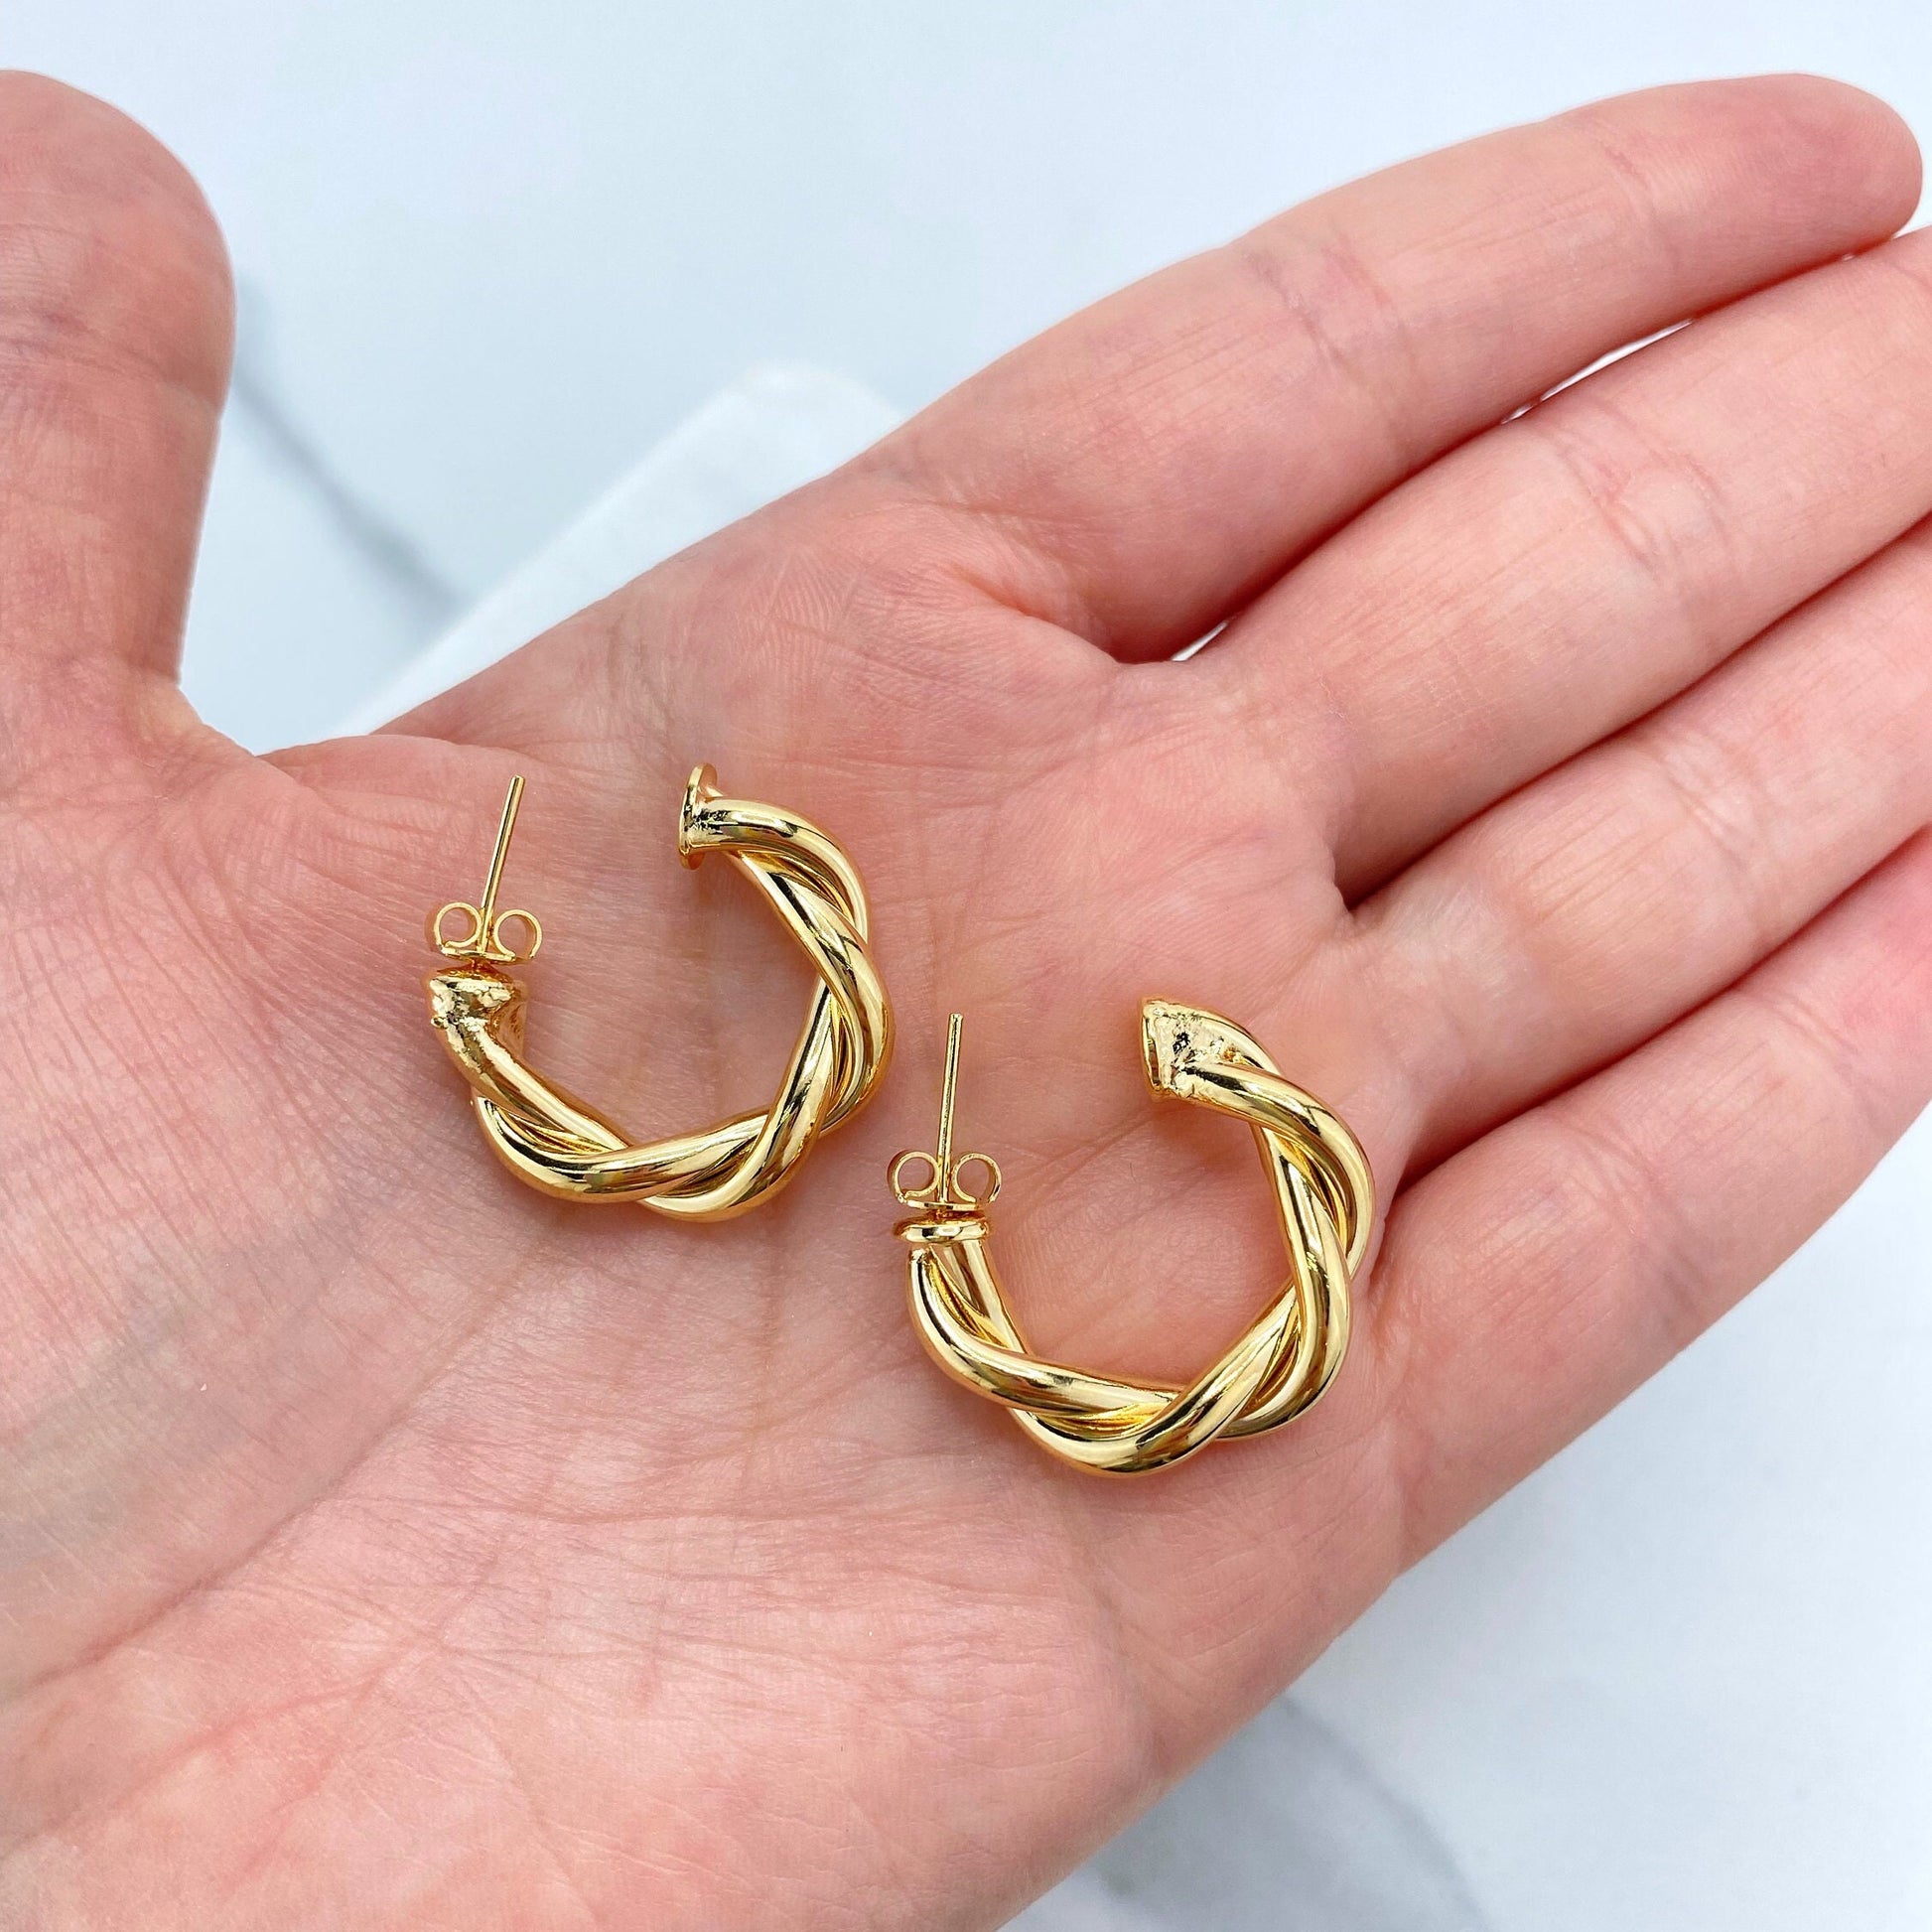 18k Gold Filled Wholesale 25mm Twisted Hoop Wholesale Jewelry Making Supplies